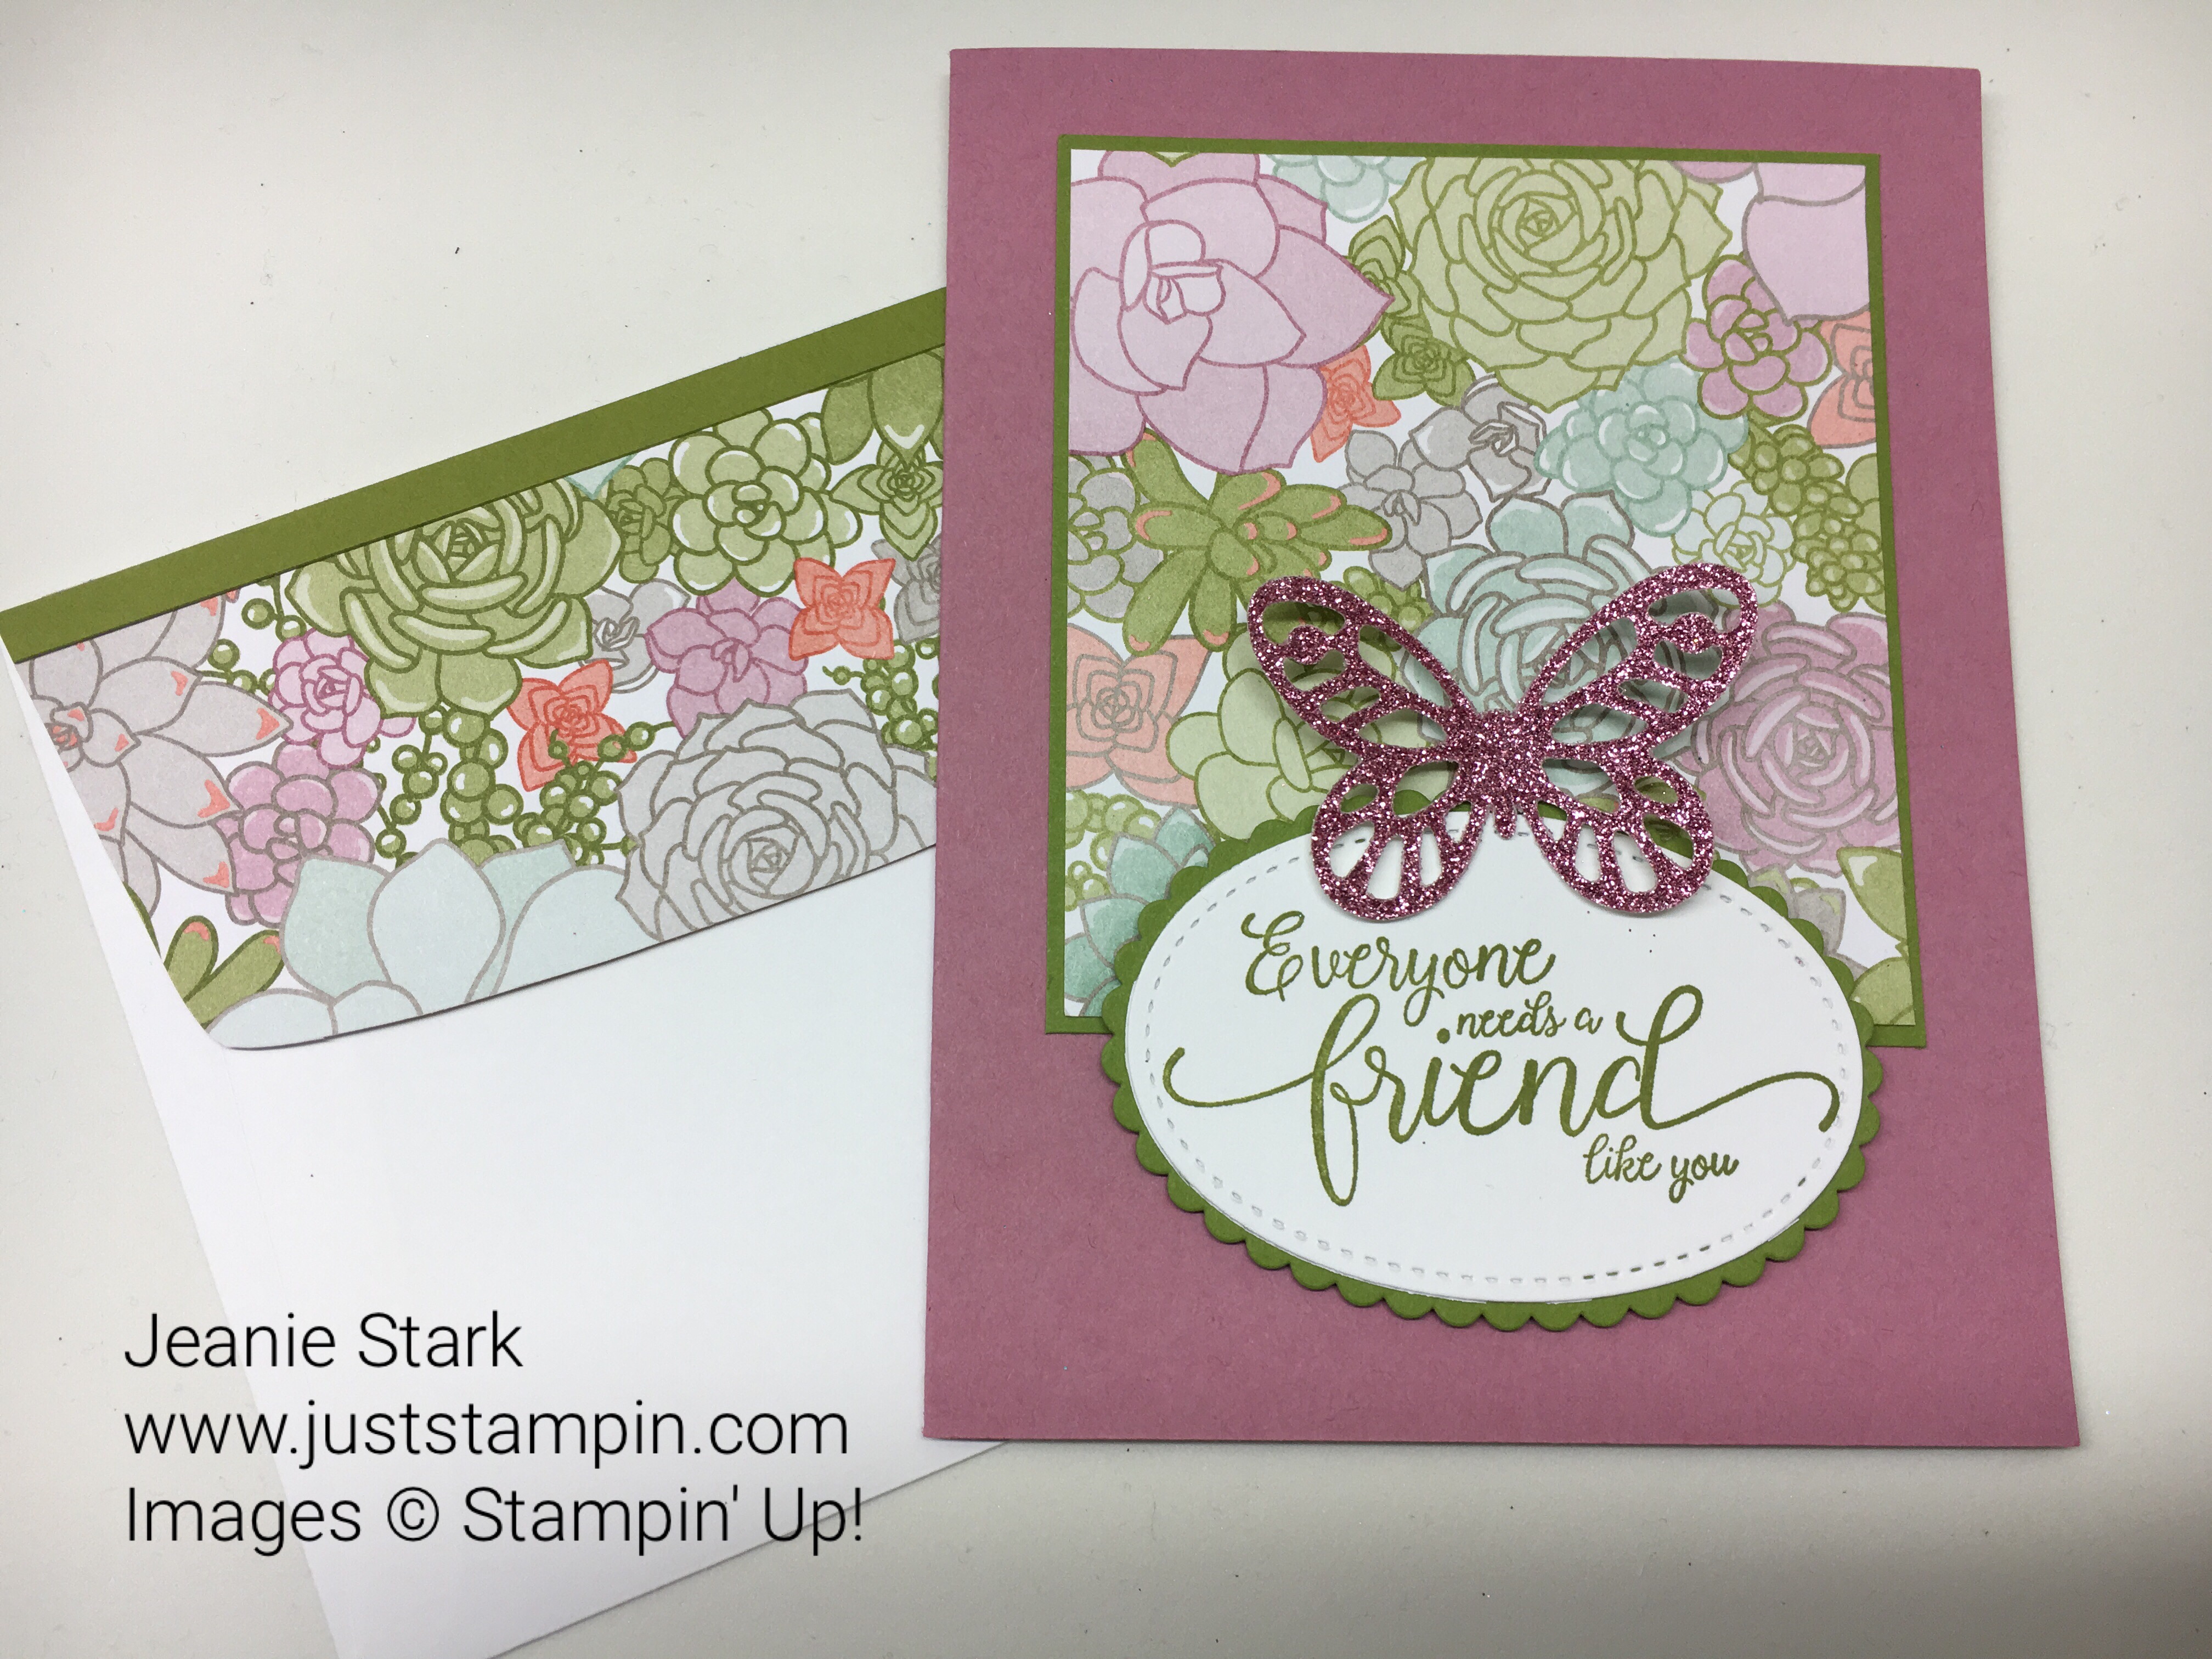 Stampin Up Clean & Simple Suite Sentiments Bold Butterfly thank you friend card idea -Jeanie Stark StampinUp